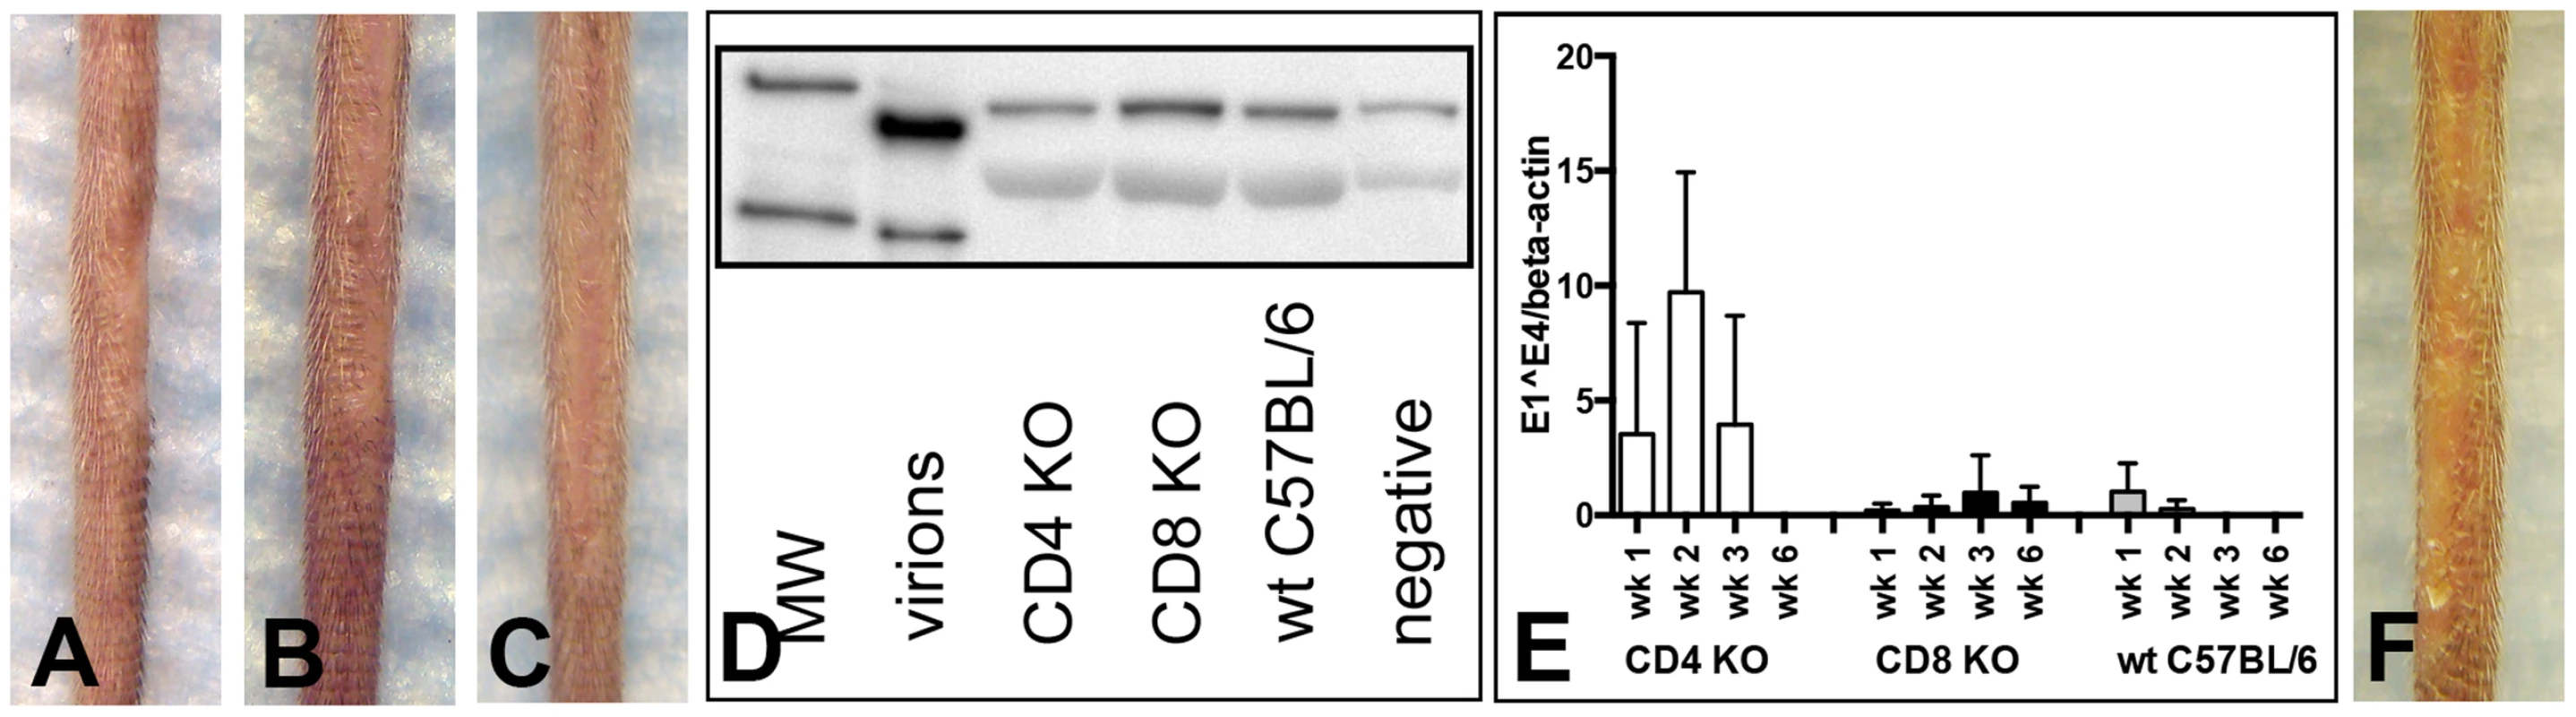 CD4- and CD8-deficient C57BL/6 mice differ in MusPV1 gene transcription early after infecton.